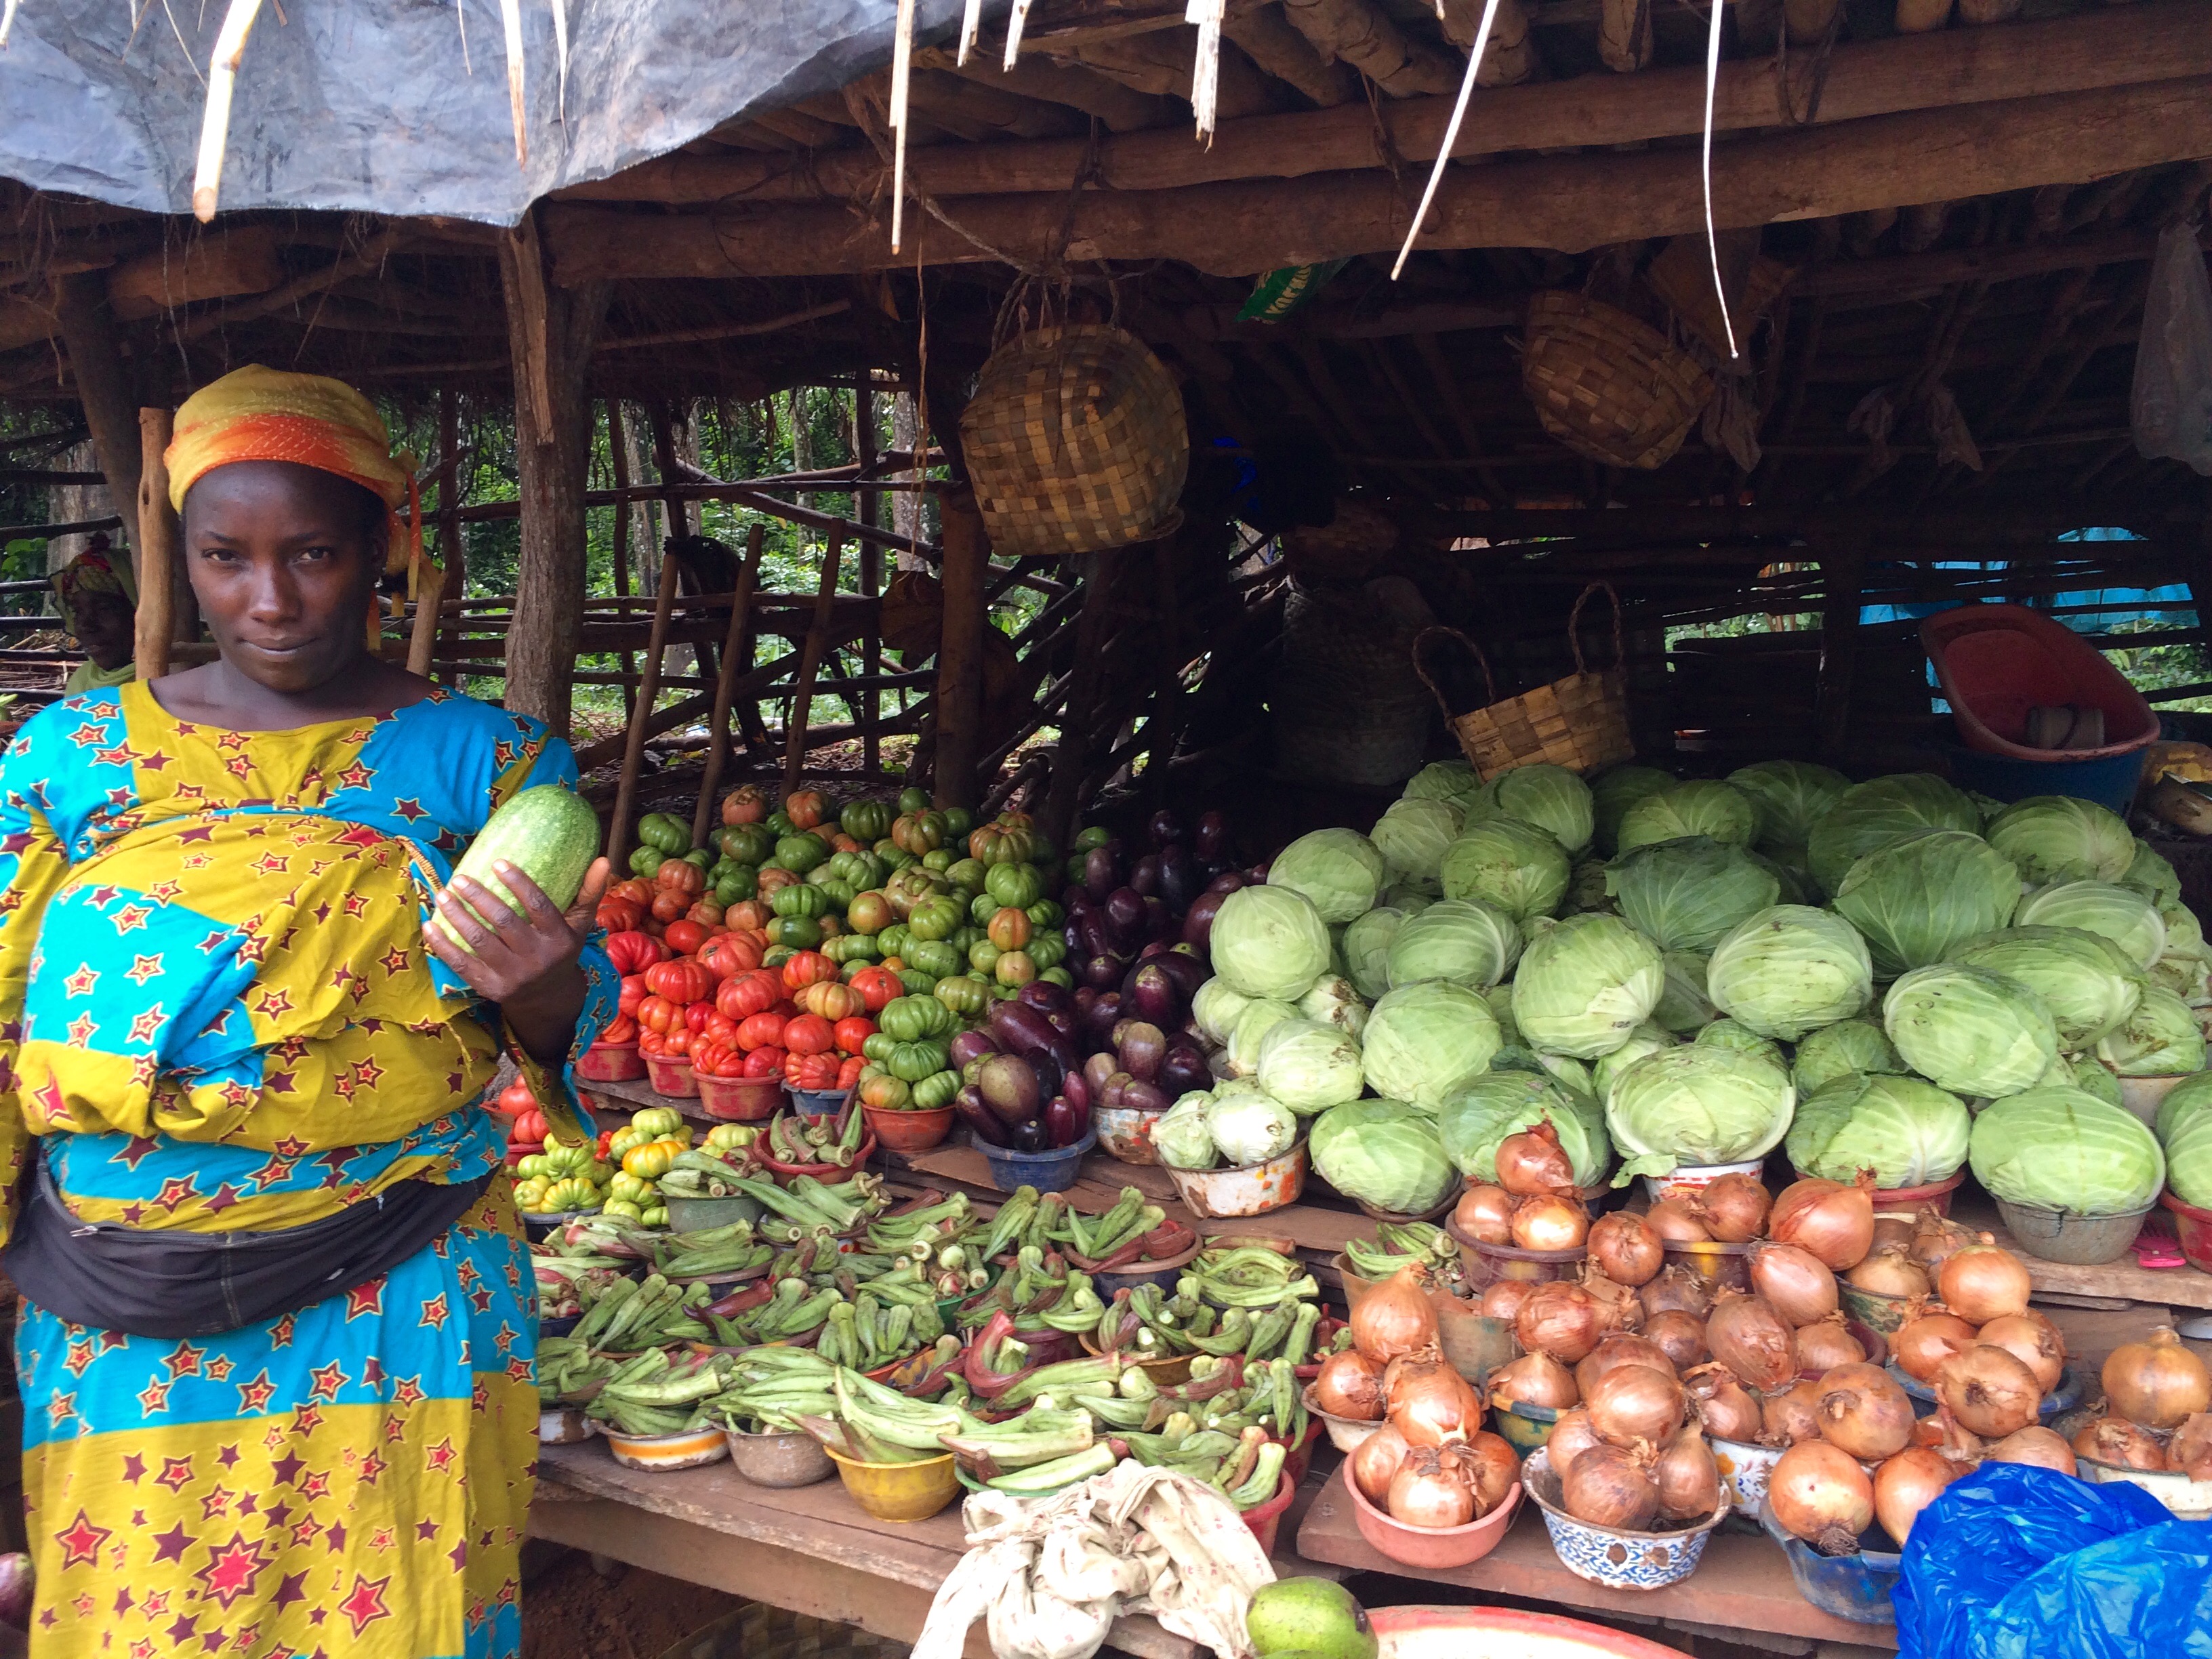 Market woman with her vegetables